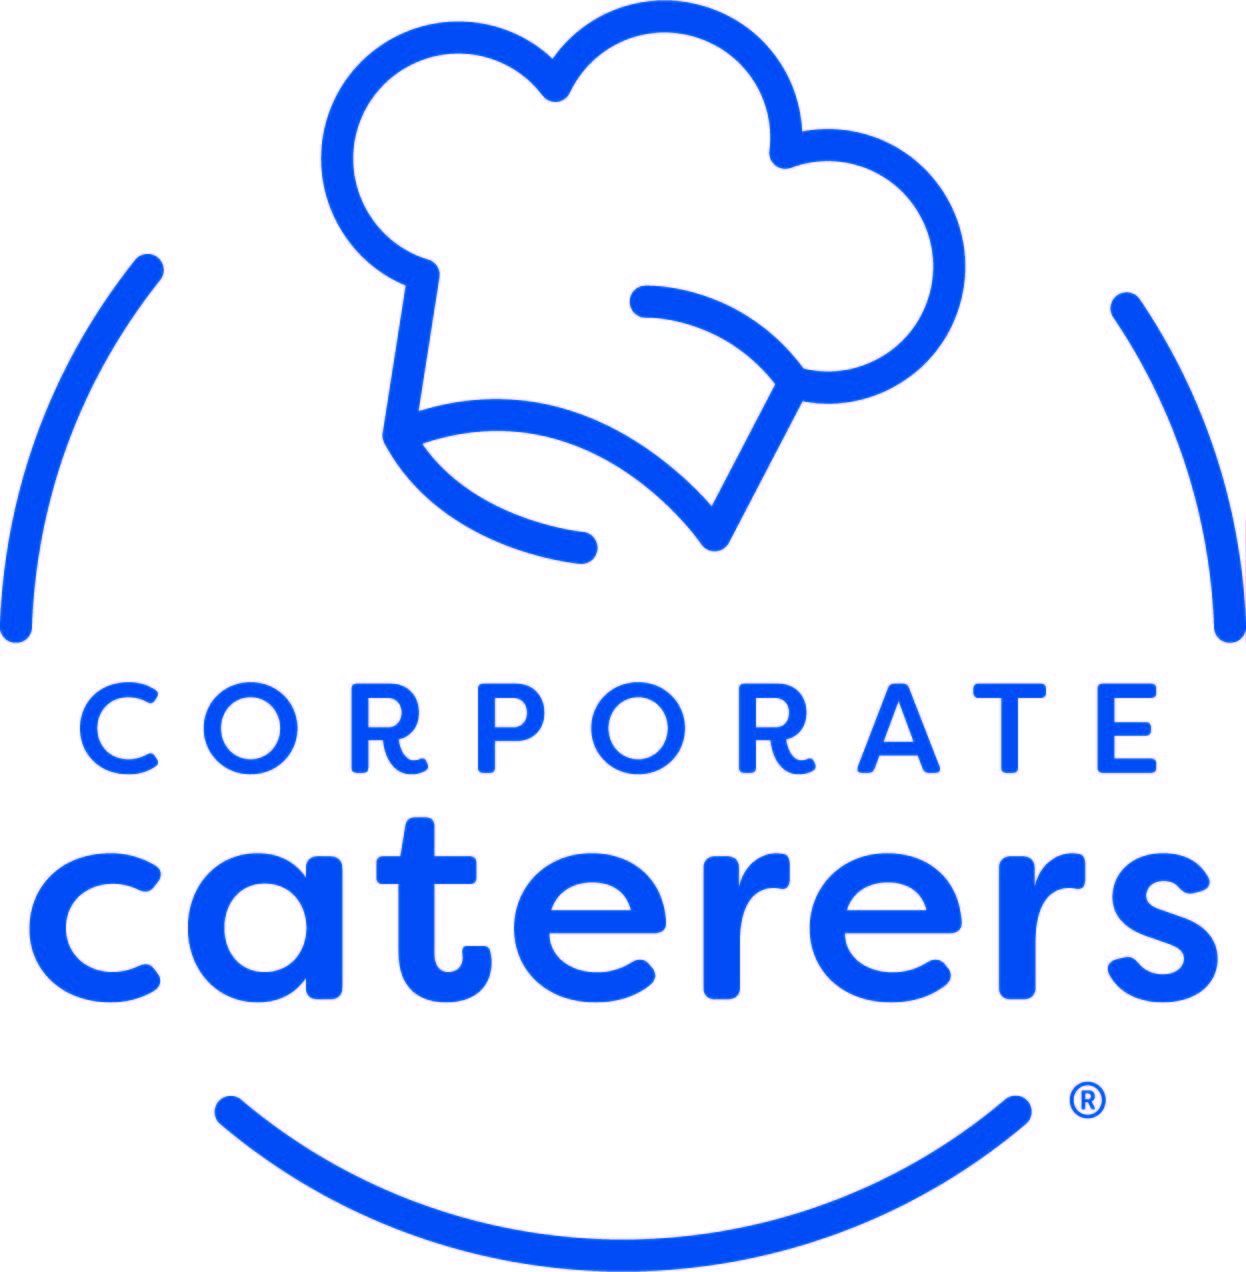 Corporate Caterers logo.